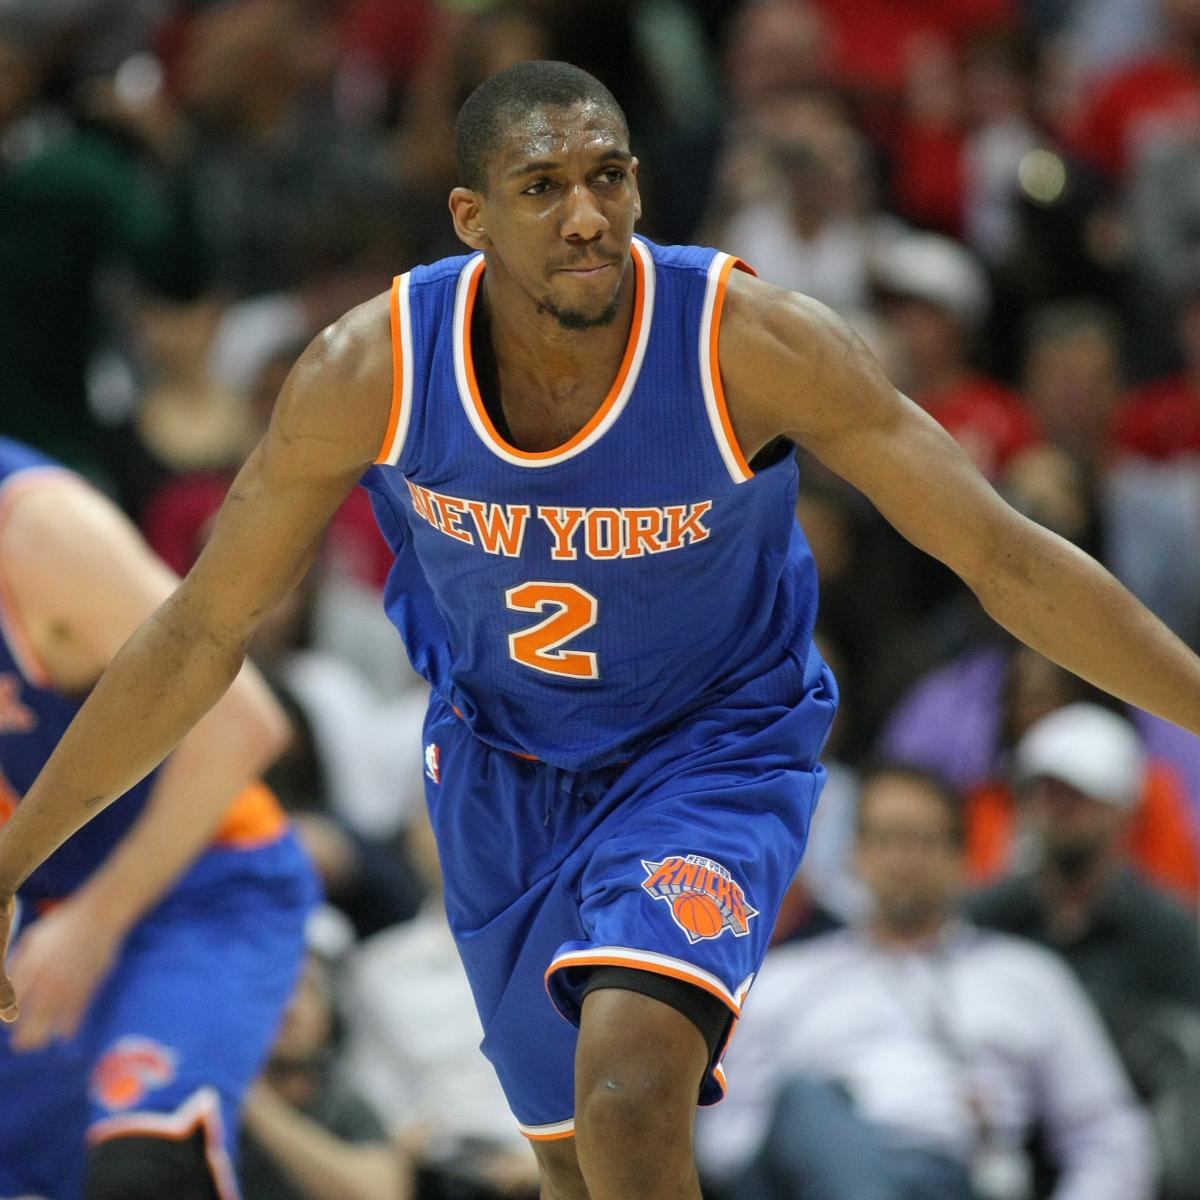 Top 10 Plays and Moments from New York Knicks' 2014-15 Season